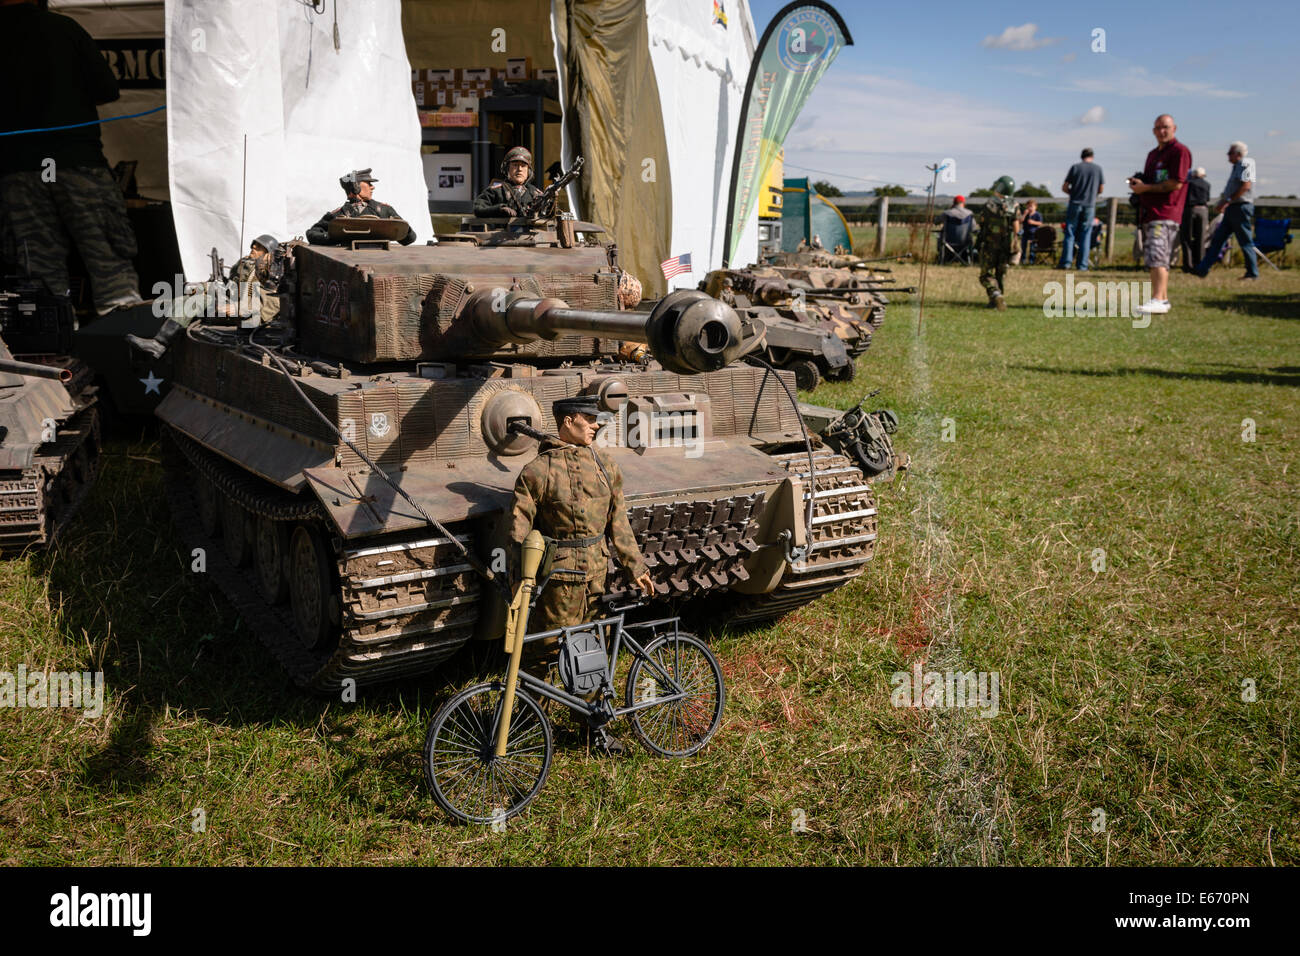 Kent, UK. 16th Aug, 2014. Miniature Tanks and soldiers on display at The 6th Annual Combined Ops Show at Headcorn Airfield. Featuring fly-overs, war re-enactments, fancy dress, actual and replica memorabilia, and more. Credit:  Tom Arne Hanslien/Alamy Live News Stock Photo